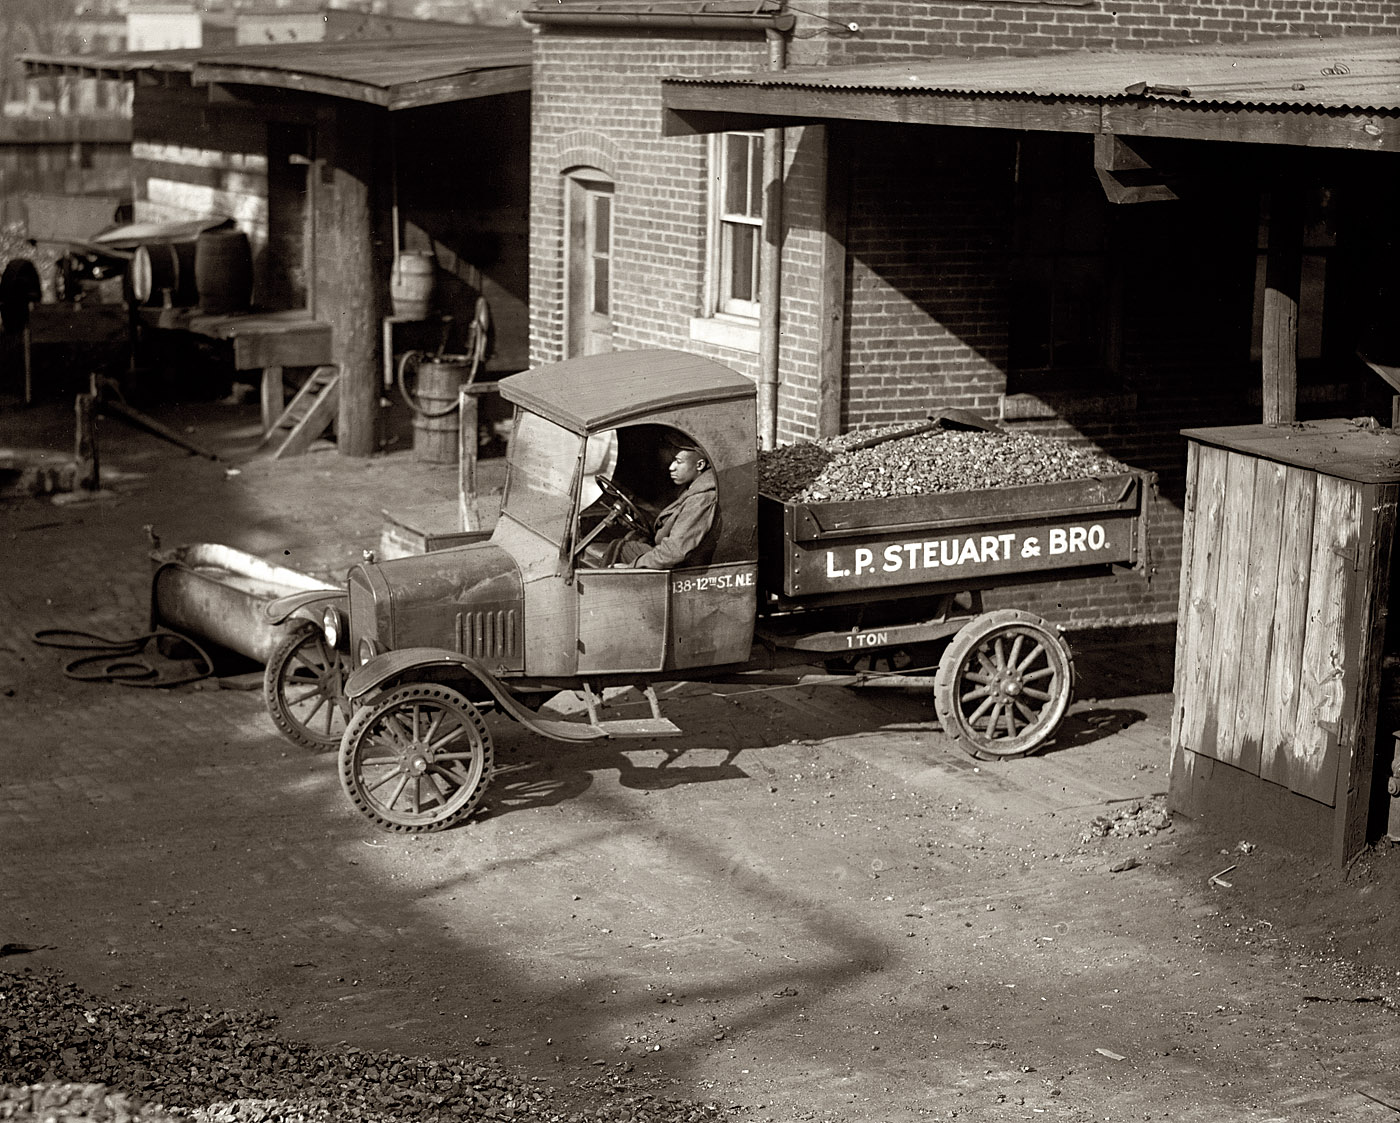 1924. "Ford Motor Co. (L.P. Steuart & Bro.)." Our third entry in National Photo's Fords-in-Washington series -- a coal delivery truck at the L.P. Steuart depot, 138 12th Street NE. View full size. National Photo Company glass negative.